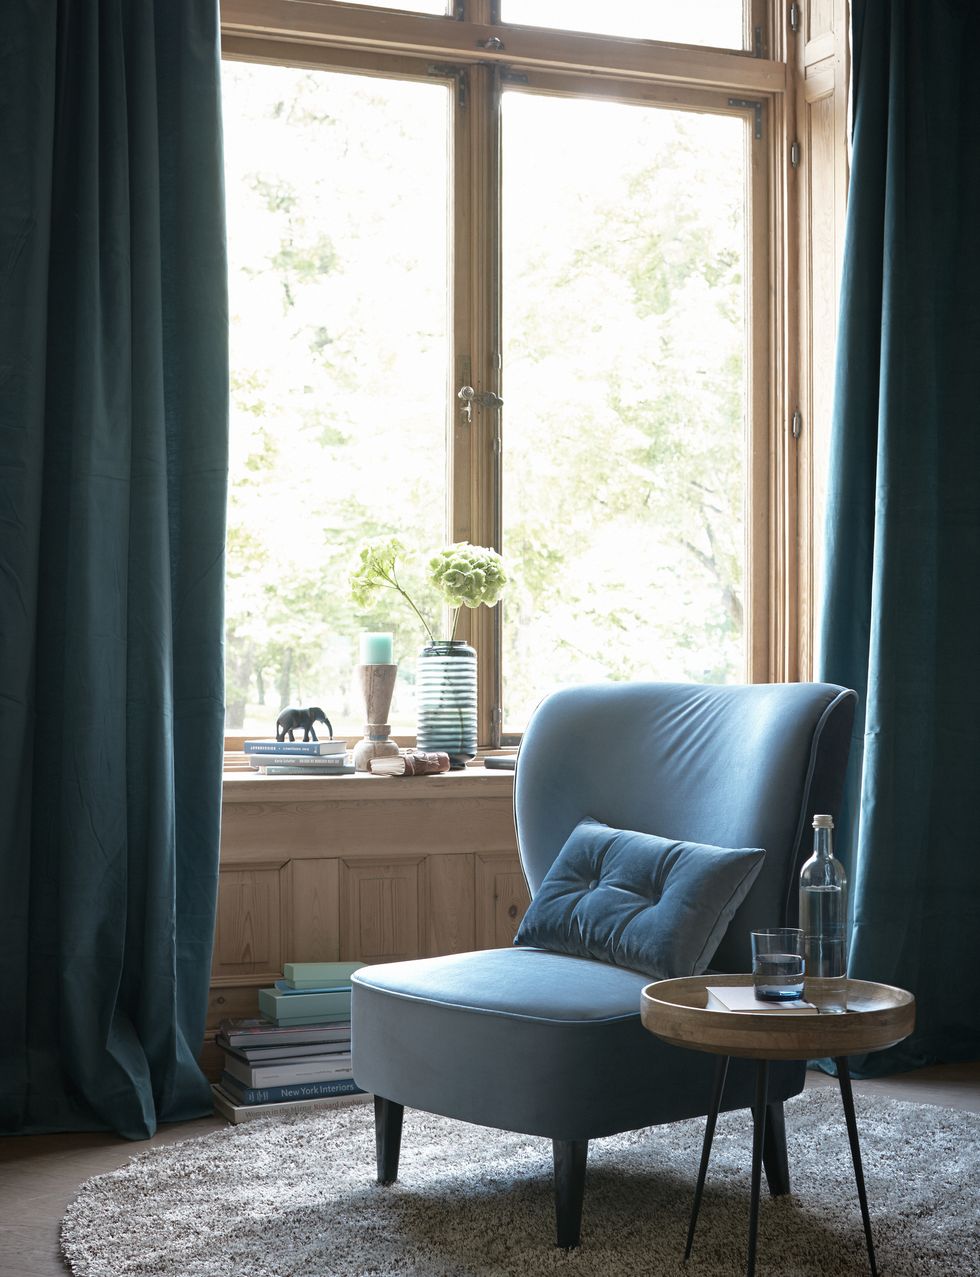 Curtain, Furniture, Room, Window treatment, Interior design, Blue, Chair, Couch, Living room, Window, 